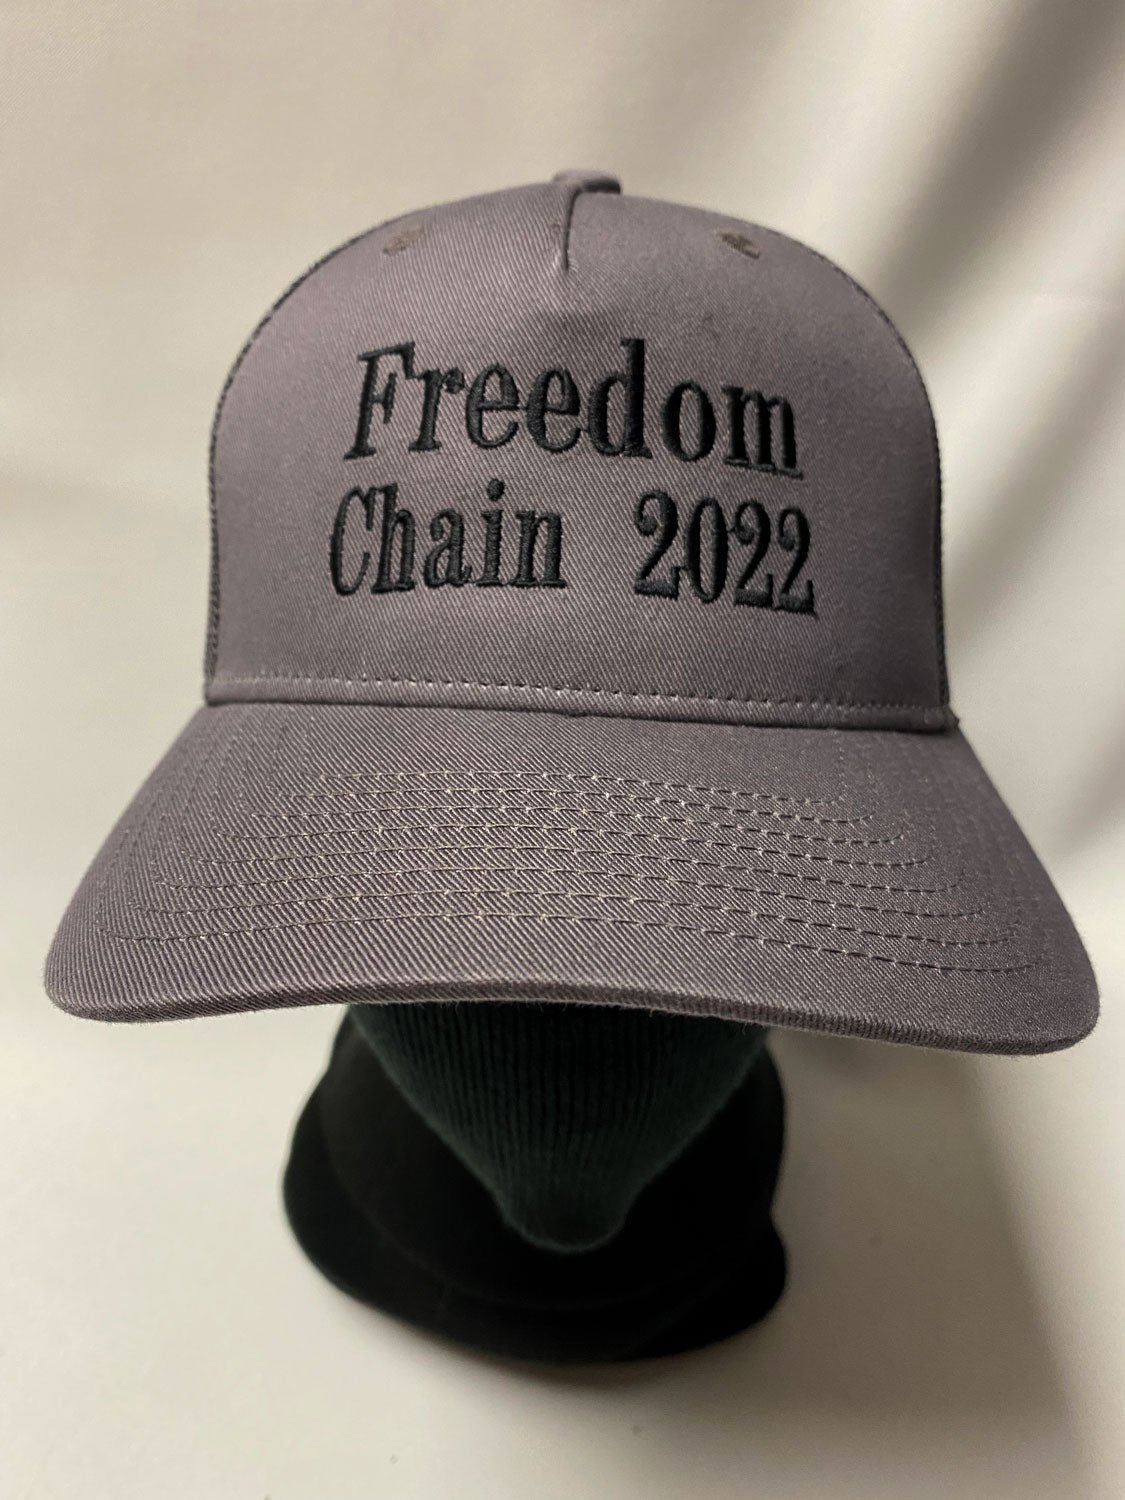 BALL CAP FREEDOM CHAIN 2022 - white embroidery on black